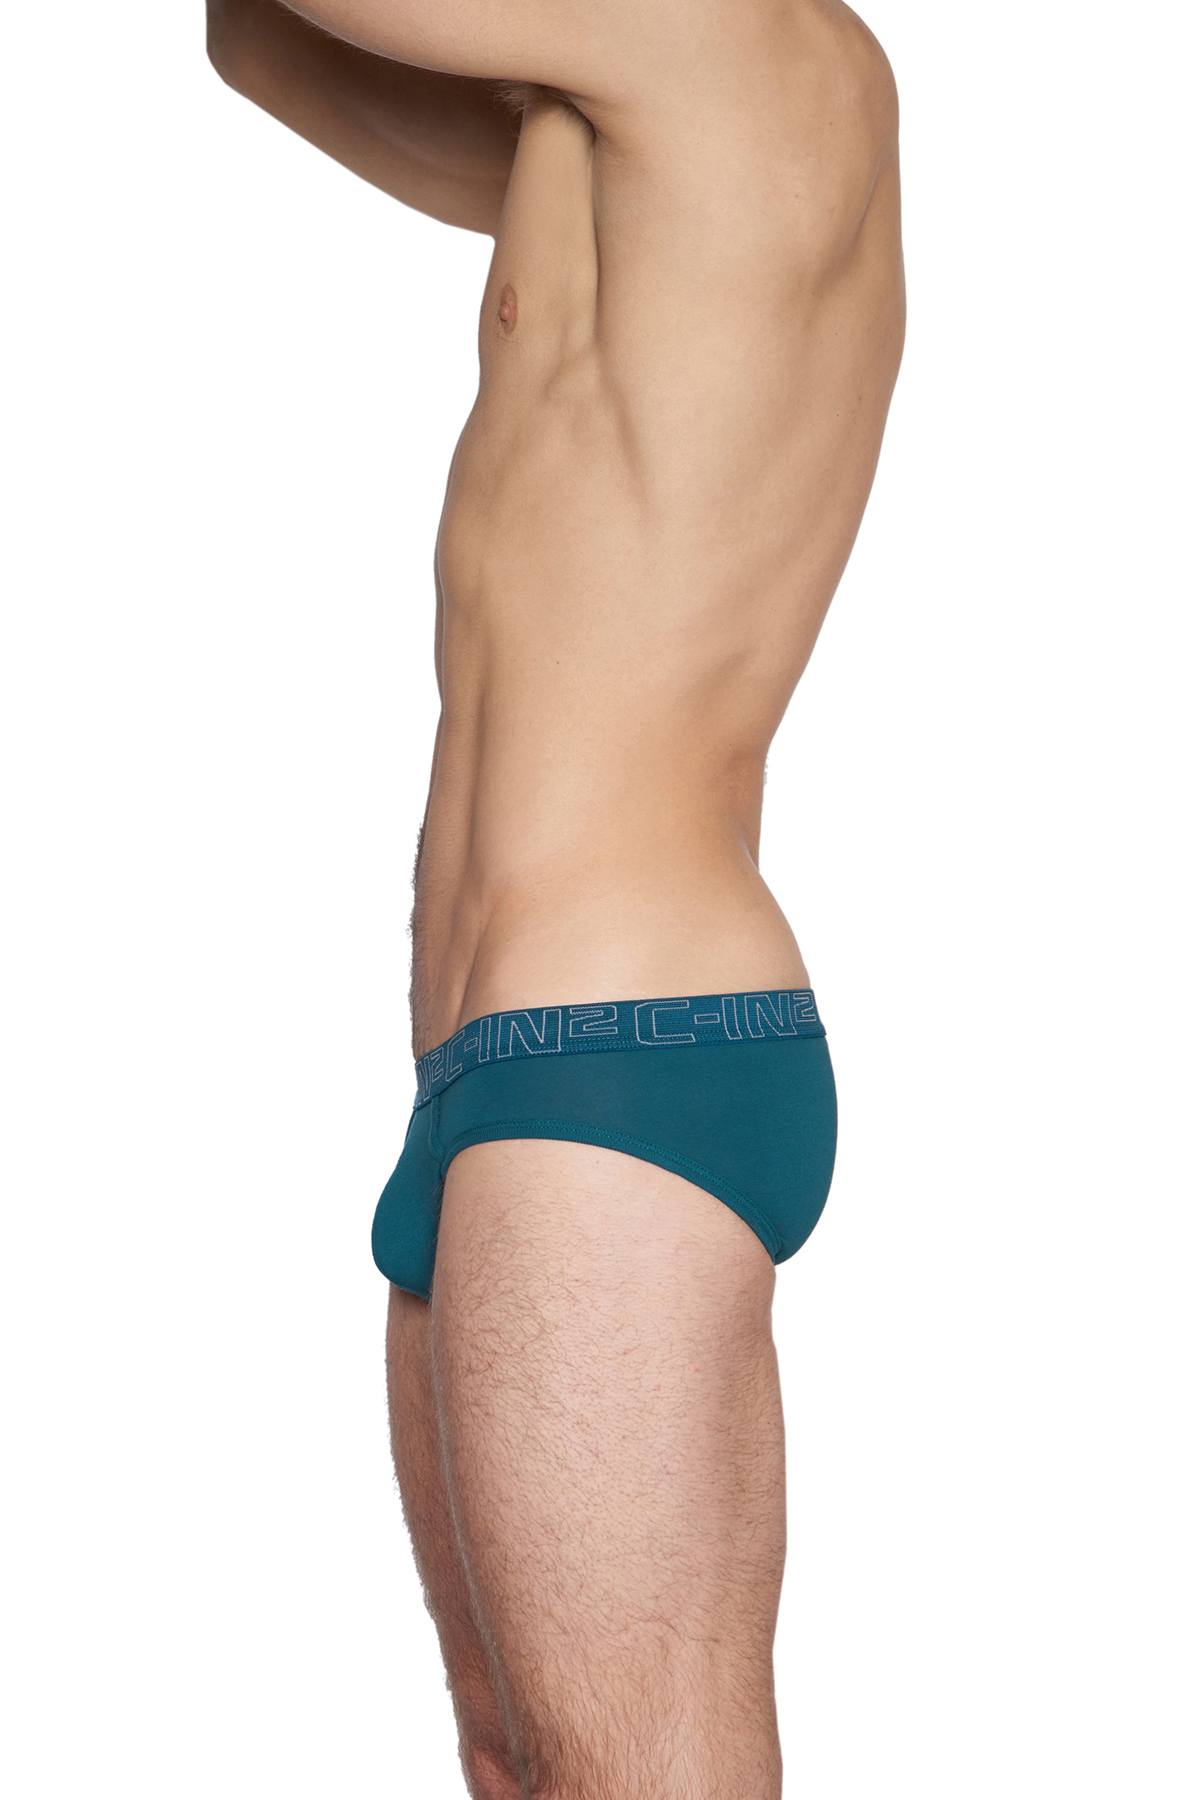 C-IN2 Tanager-Teal/Purple-Label Low Rise Brief 2-Pack